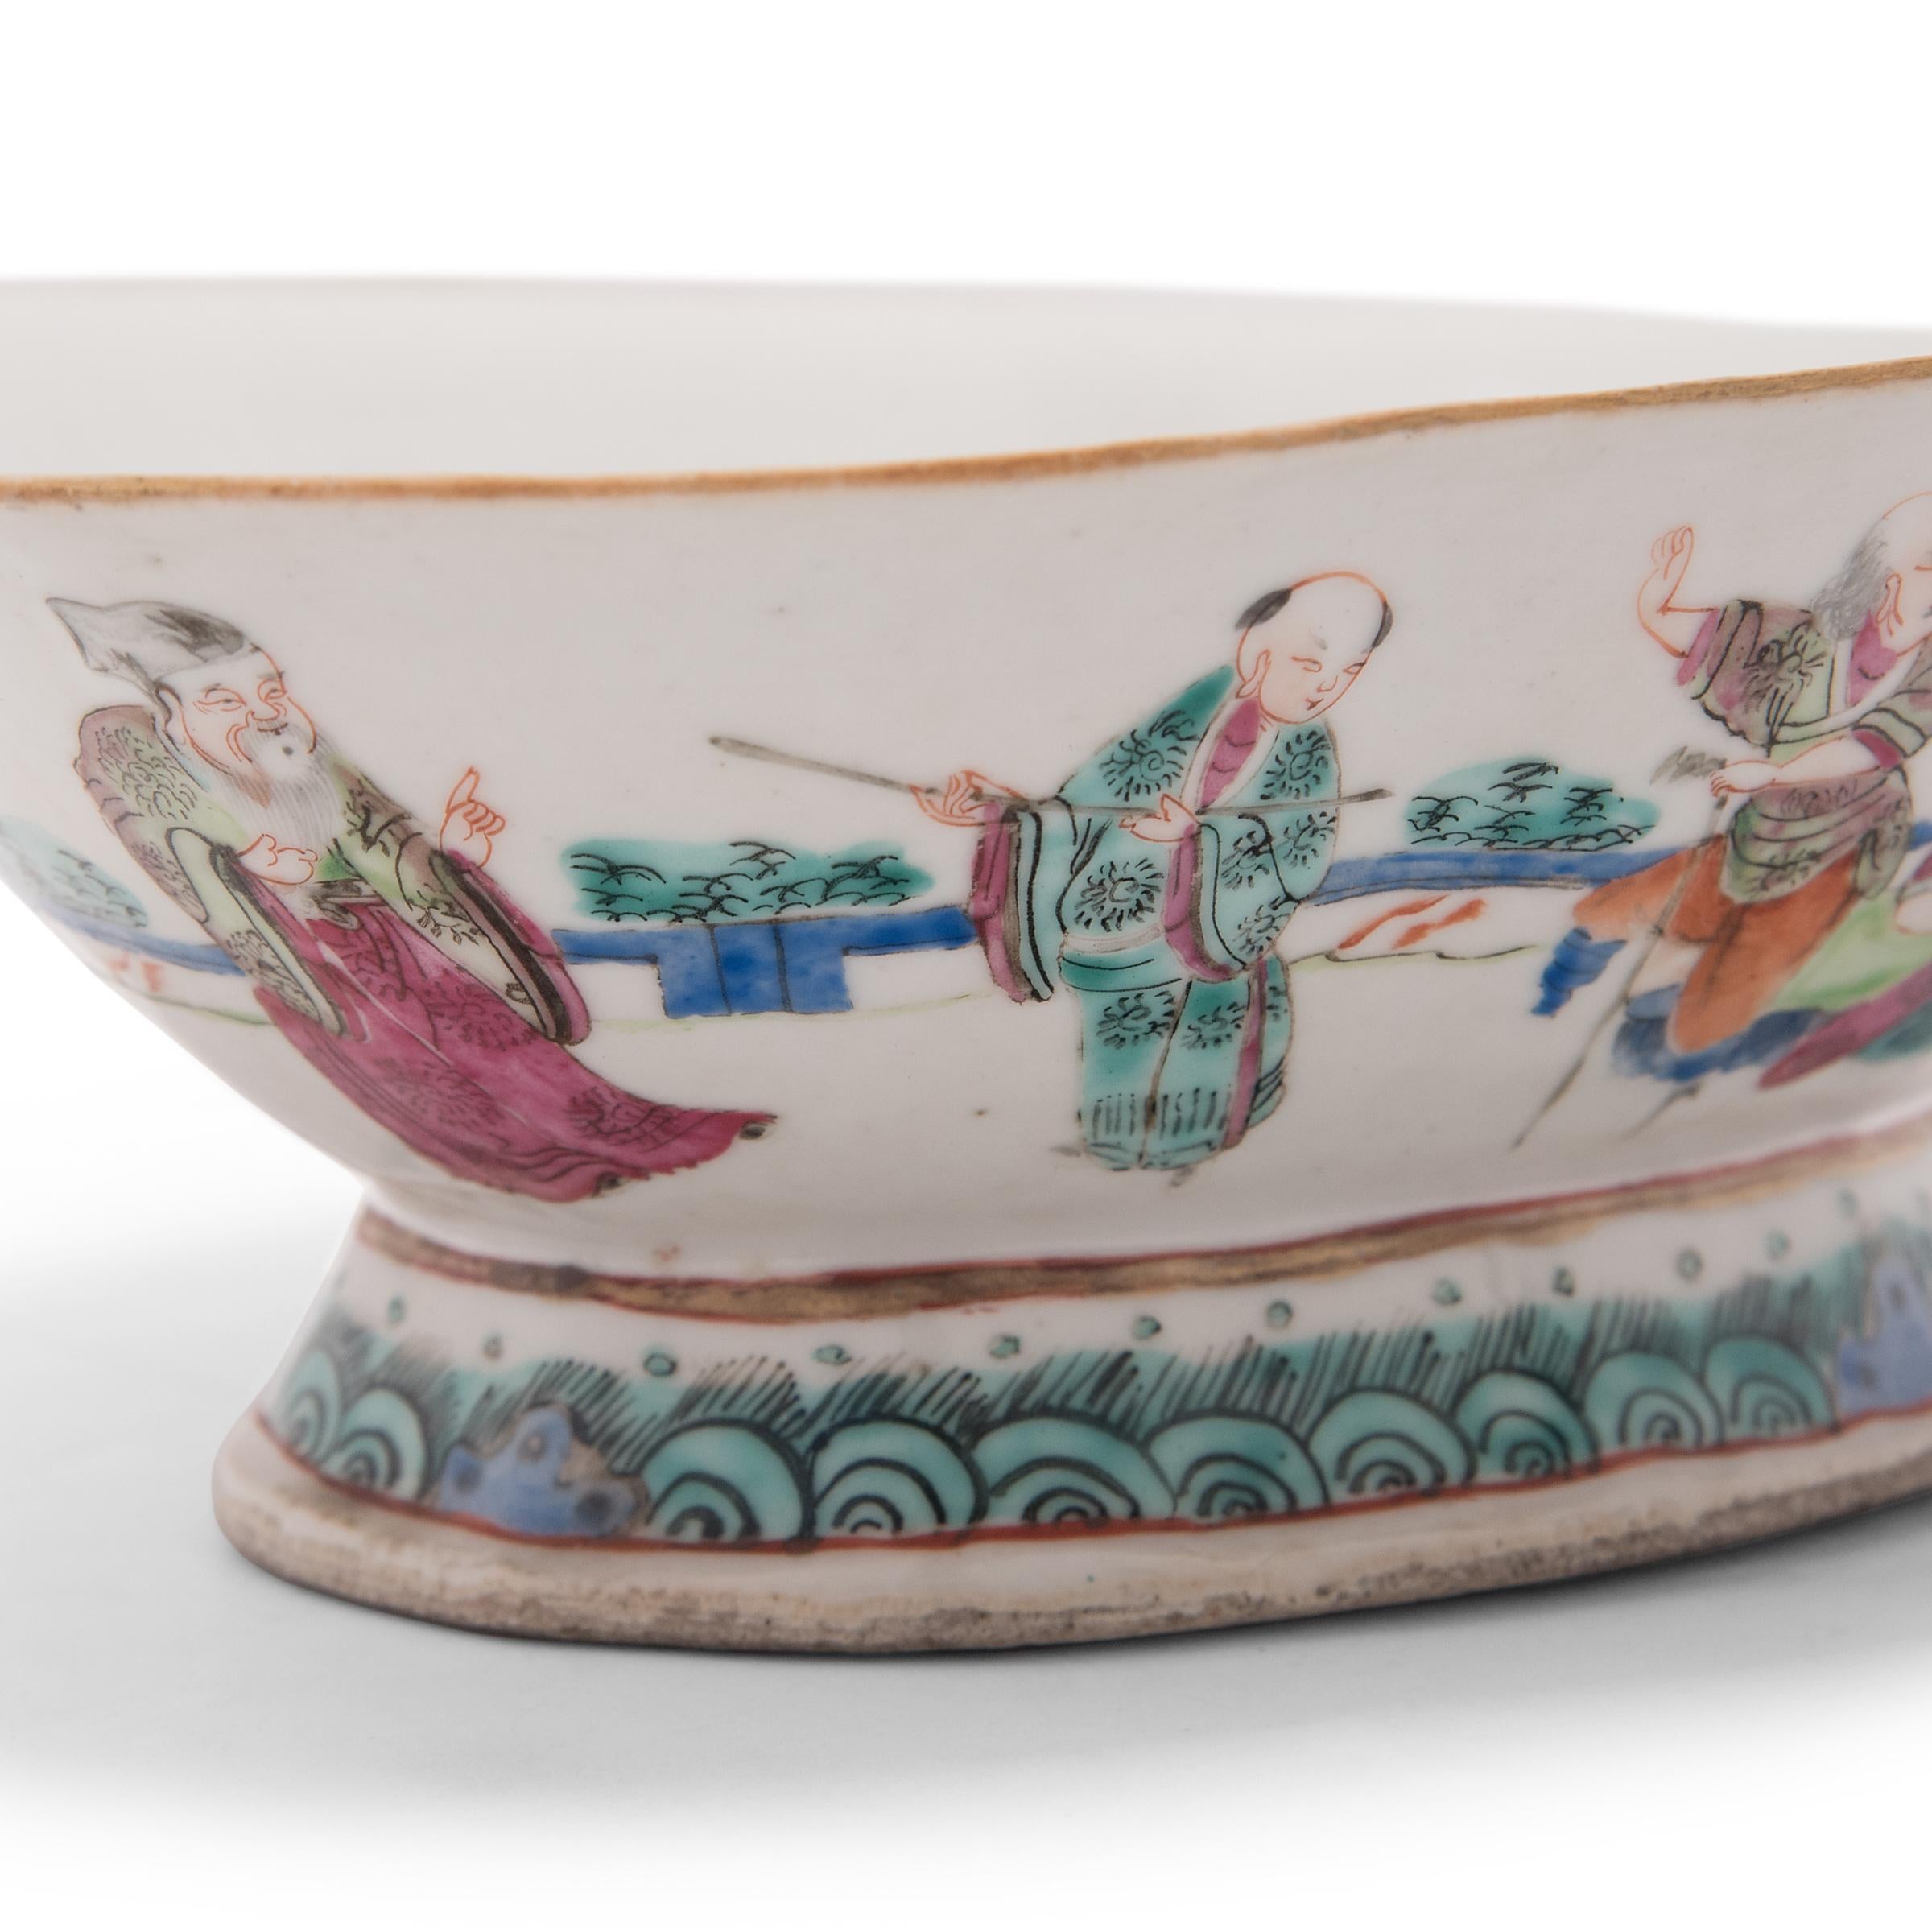 19th Century Chinese Footed Offering Bowl with Gathering of Immortals, c. 1850